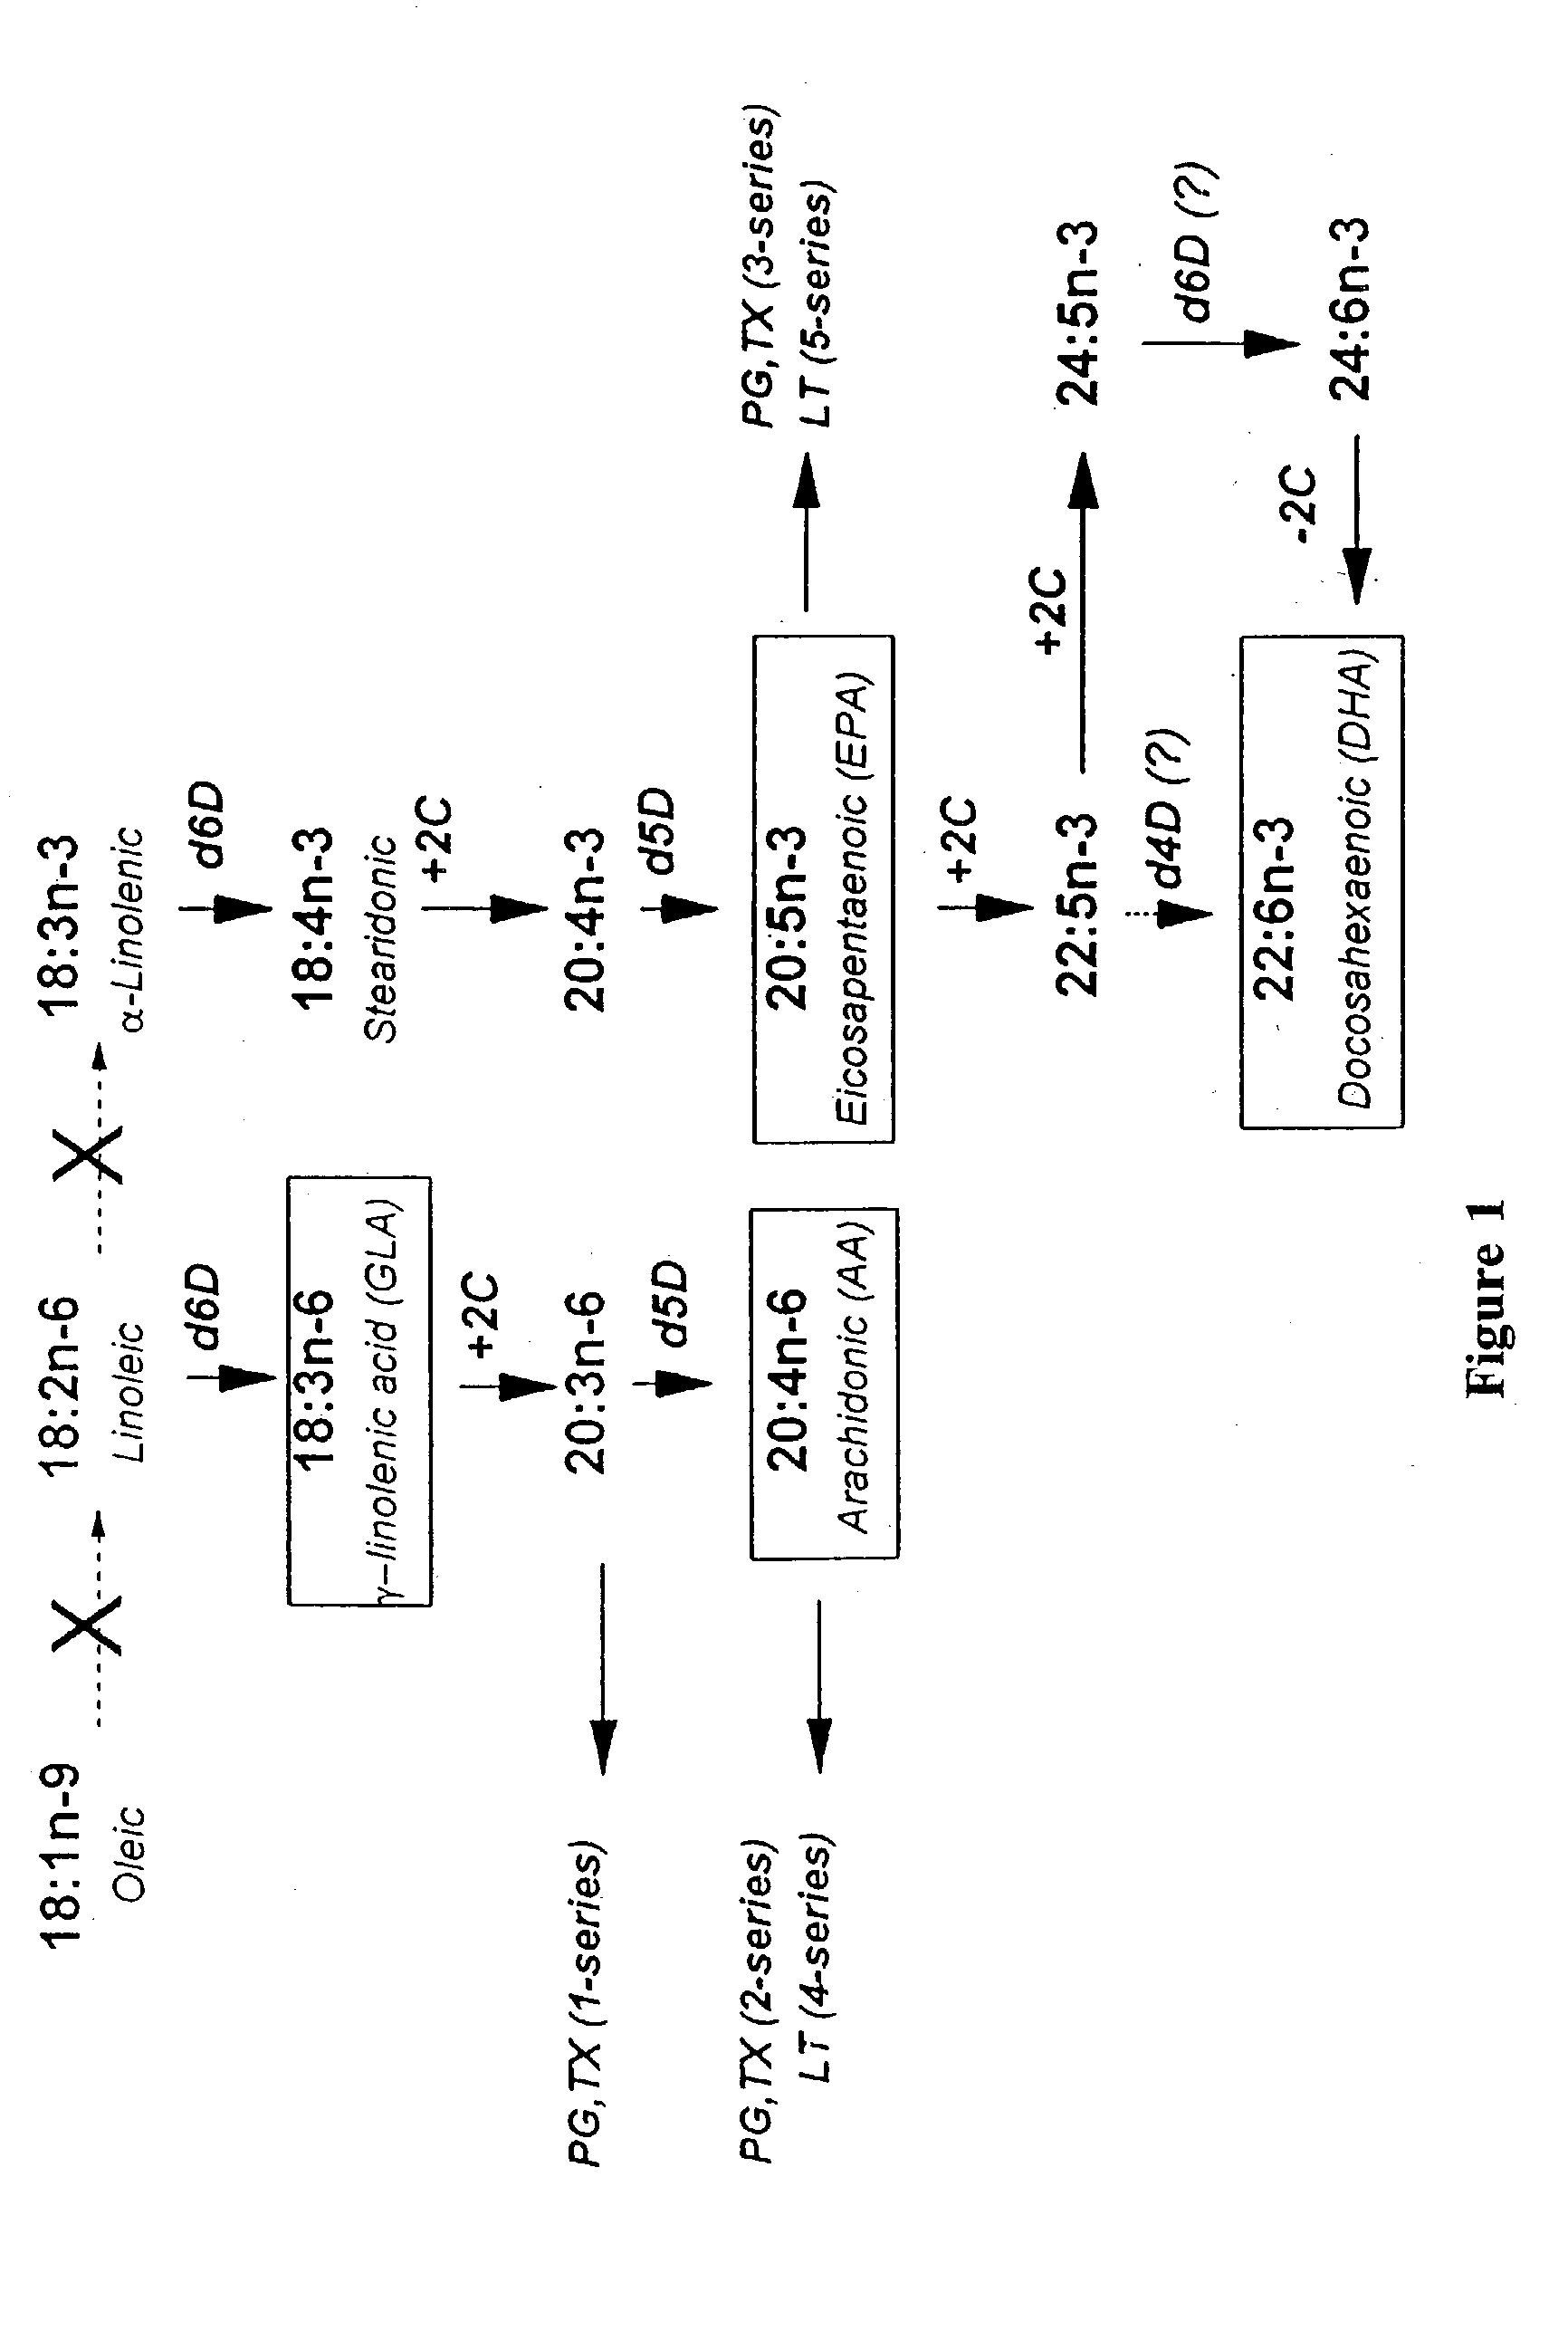 Compositions and methods for the synthesis of fatty acids, their derivatives and downstream products